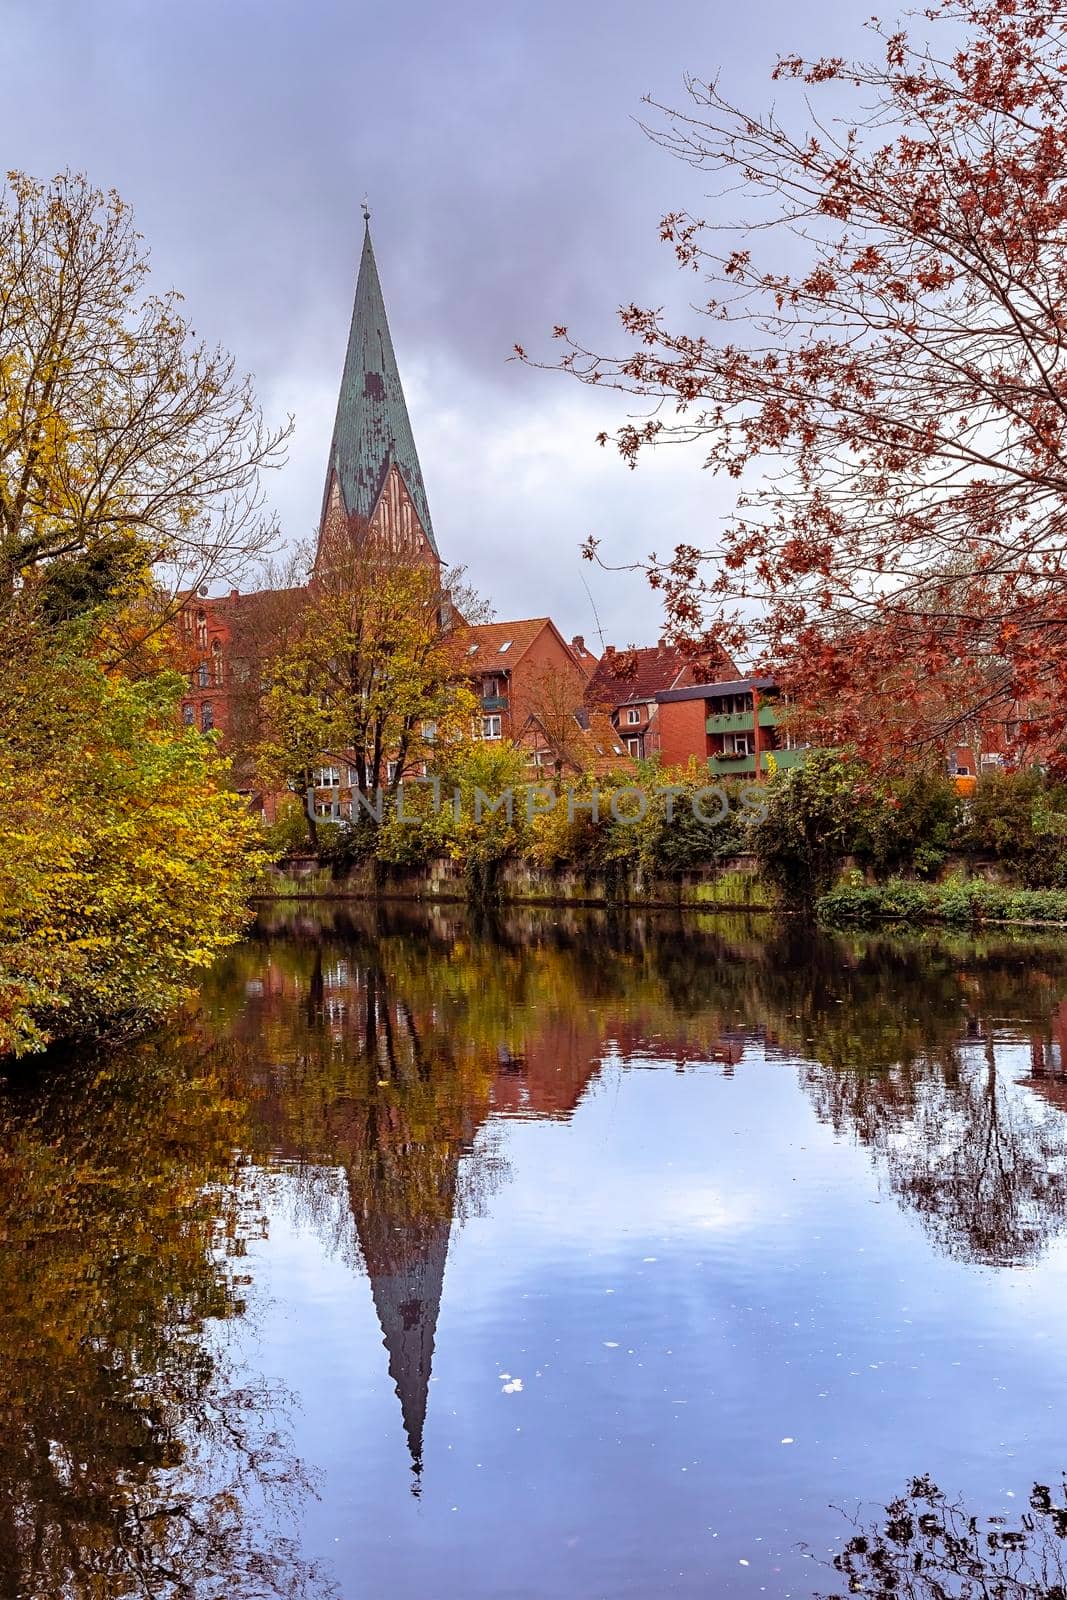 Luneburg, Germany, View of St. Johanniskirche with reflection in the river by seka33